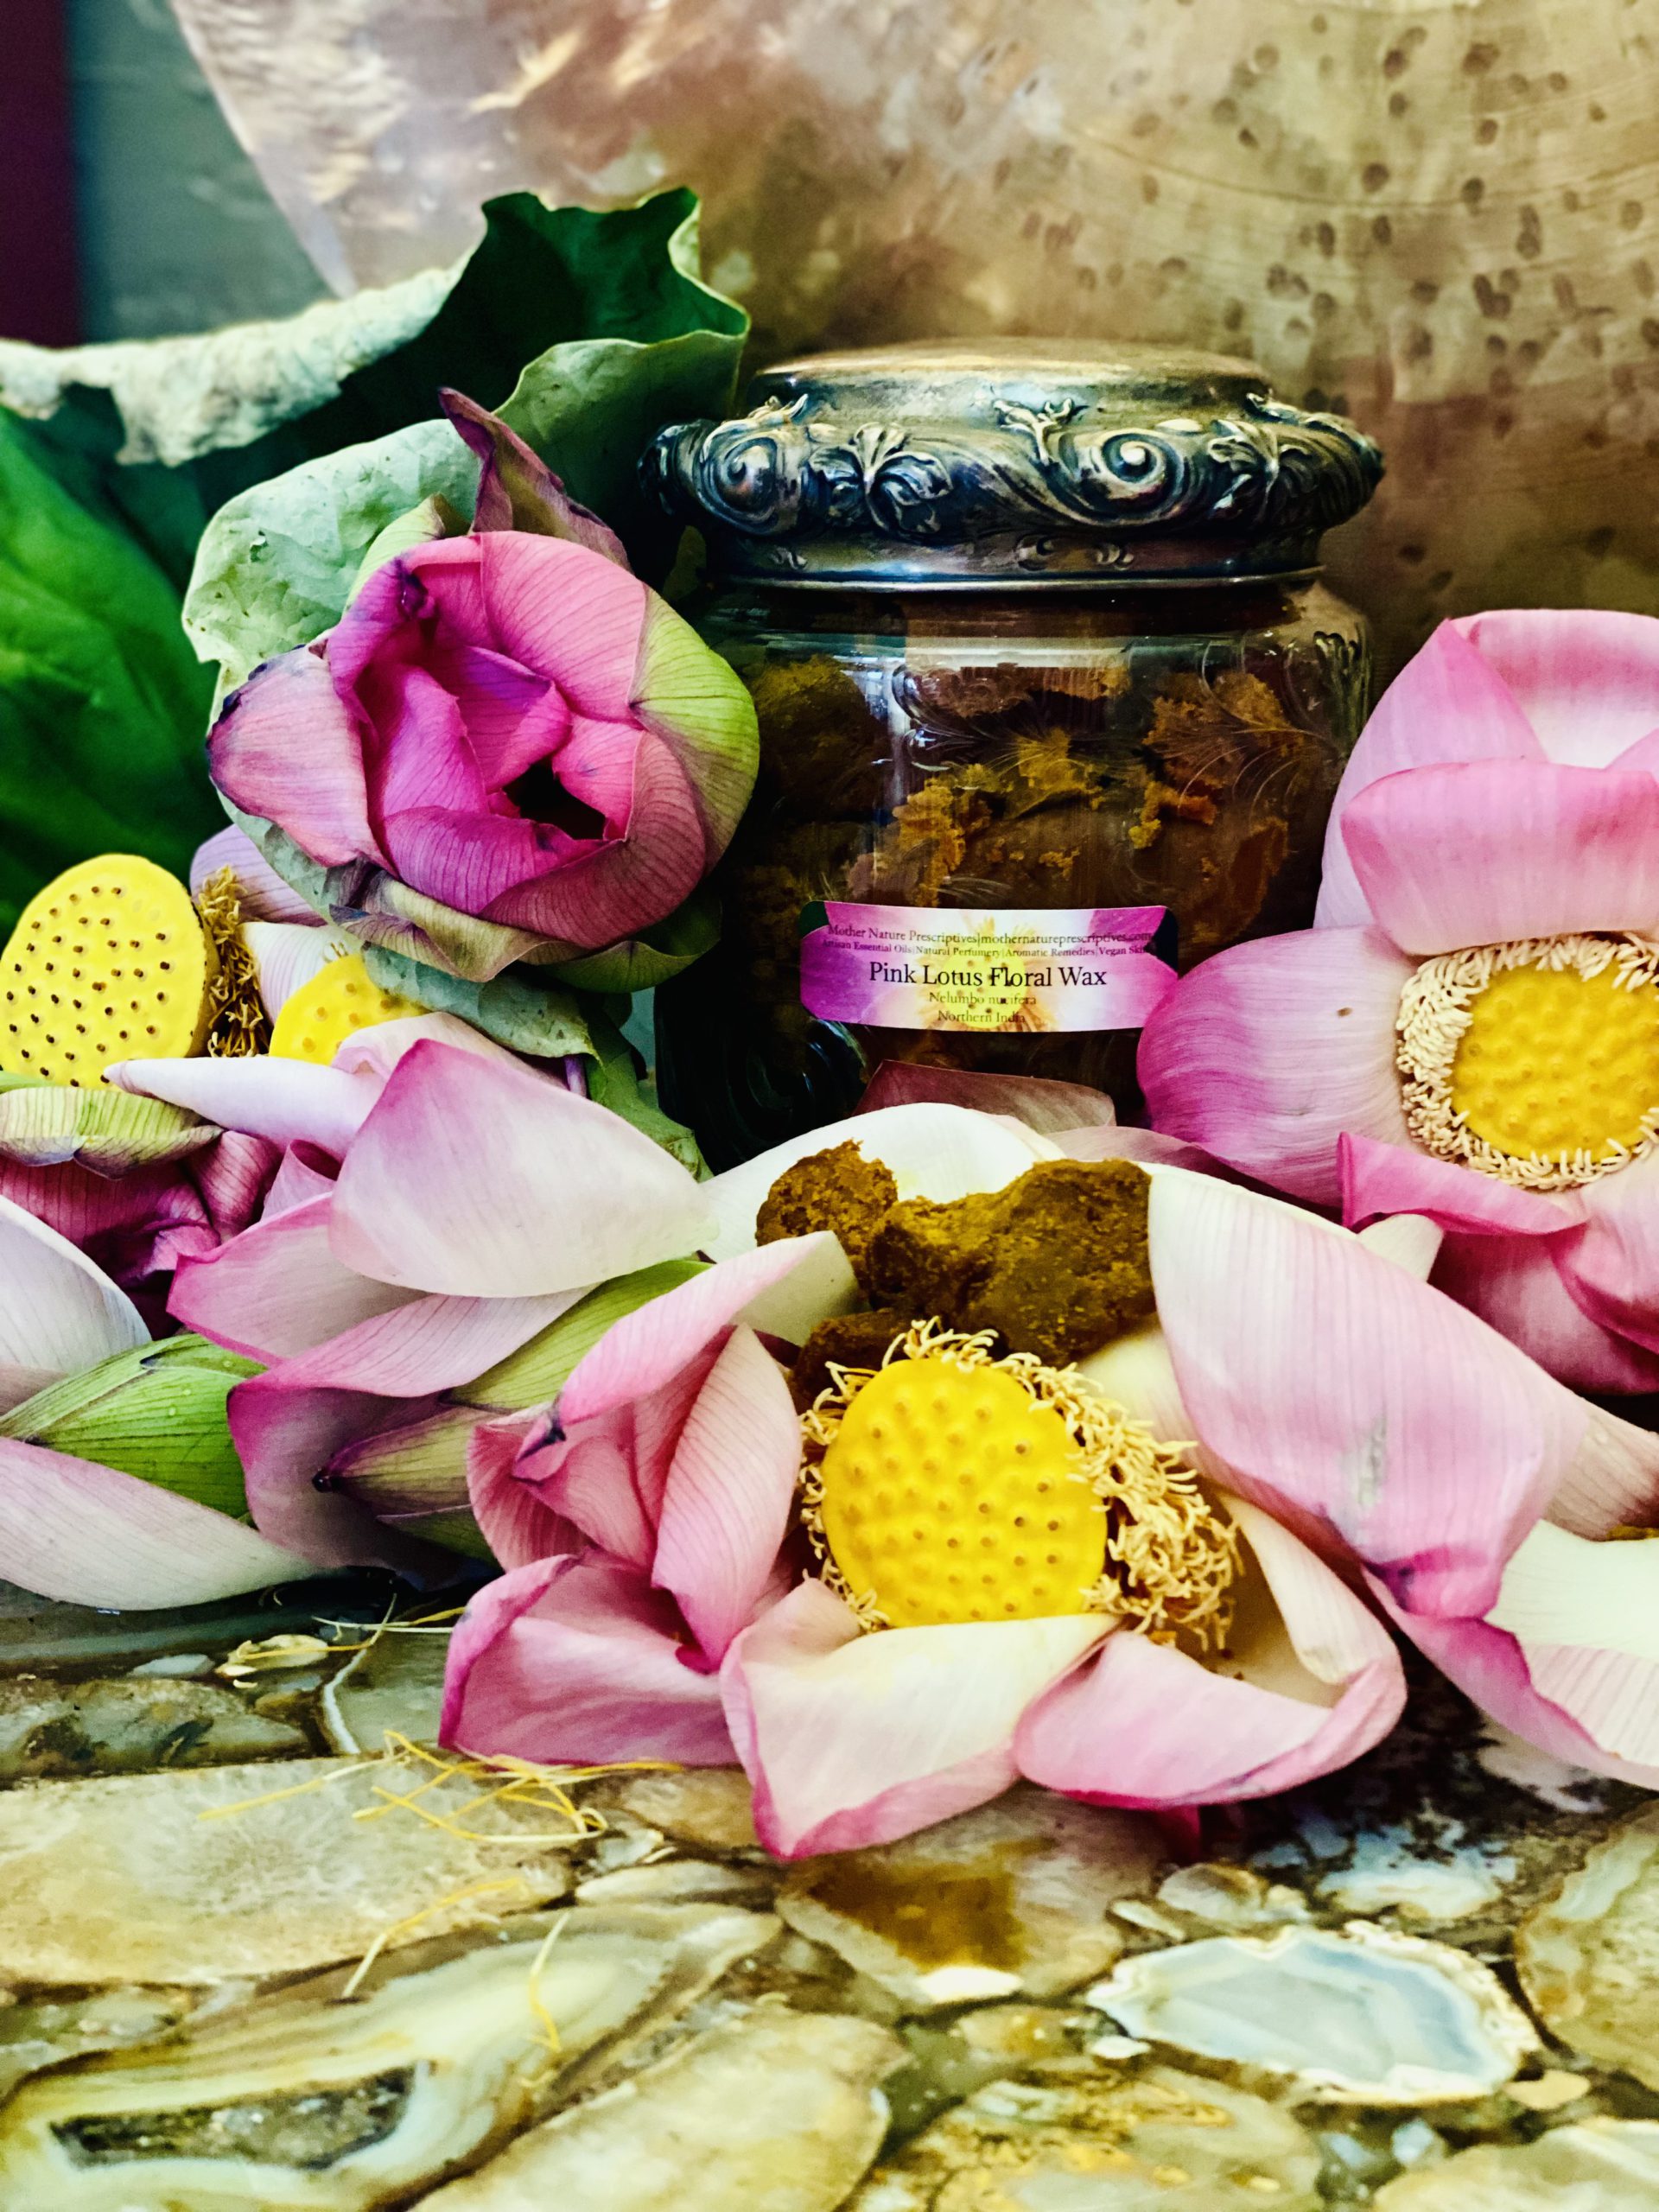 Pink Lotus Floral Wax - Essential Oil Apothecary